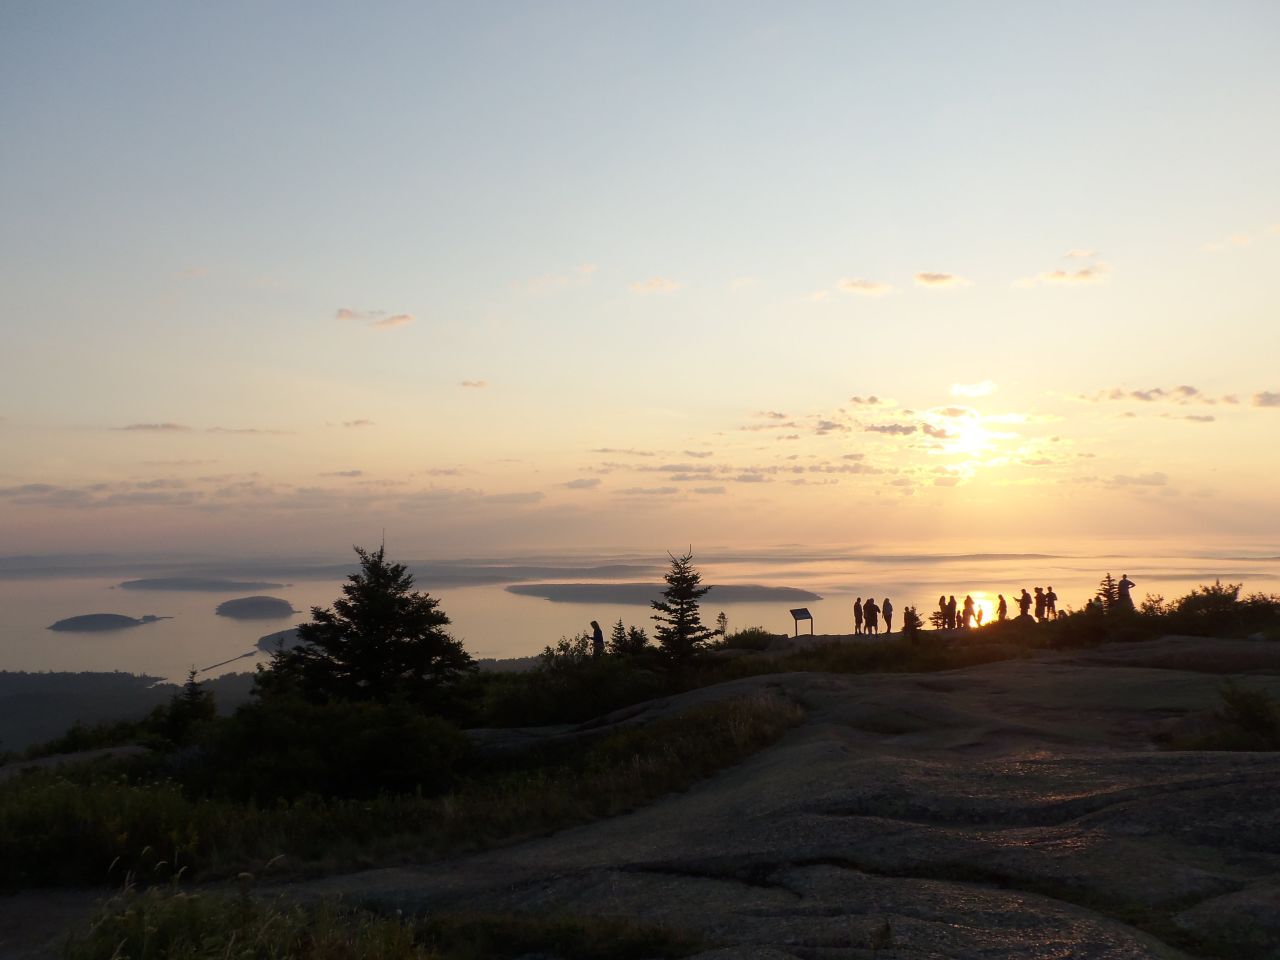 <a href="http://www.nps.gov/acad/learn/management/cadillac.htm" target="_blank" target="_blank">Cadillac Mountain</a> is the highest point on the East Coast of the U.S. The mountain is a popular tourist destination because of its <a href="http://ireport.cnn.com/docs/DOC-1265592">sunrise views</a>.